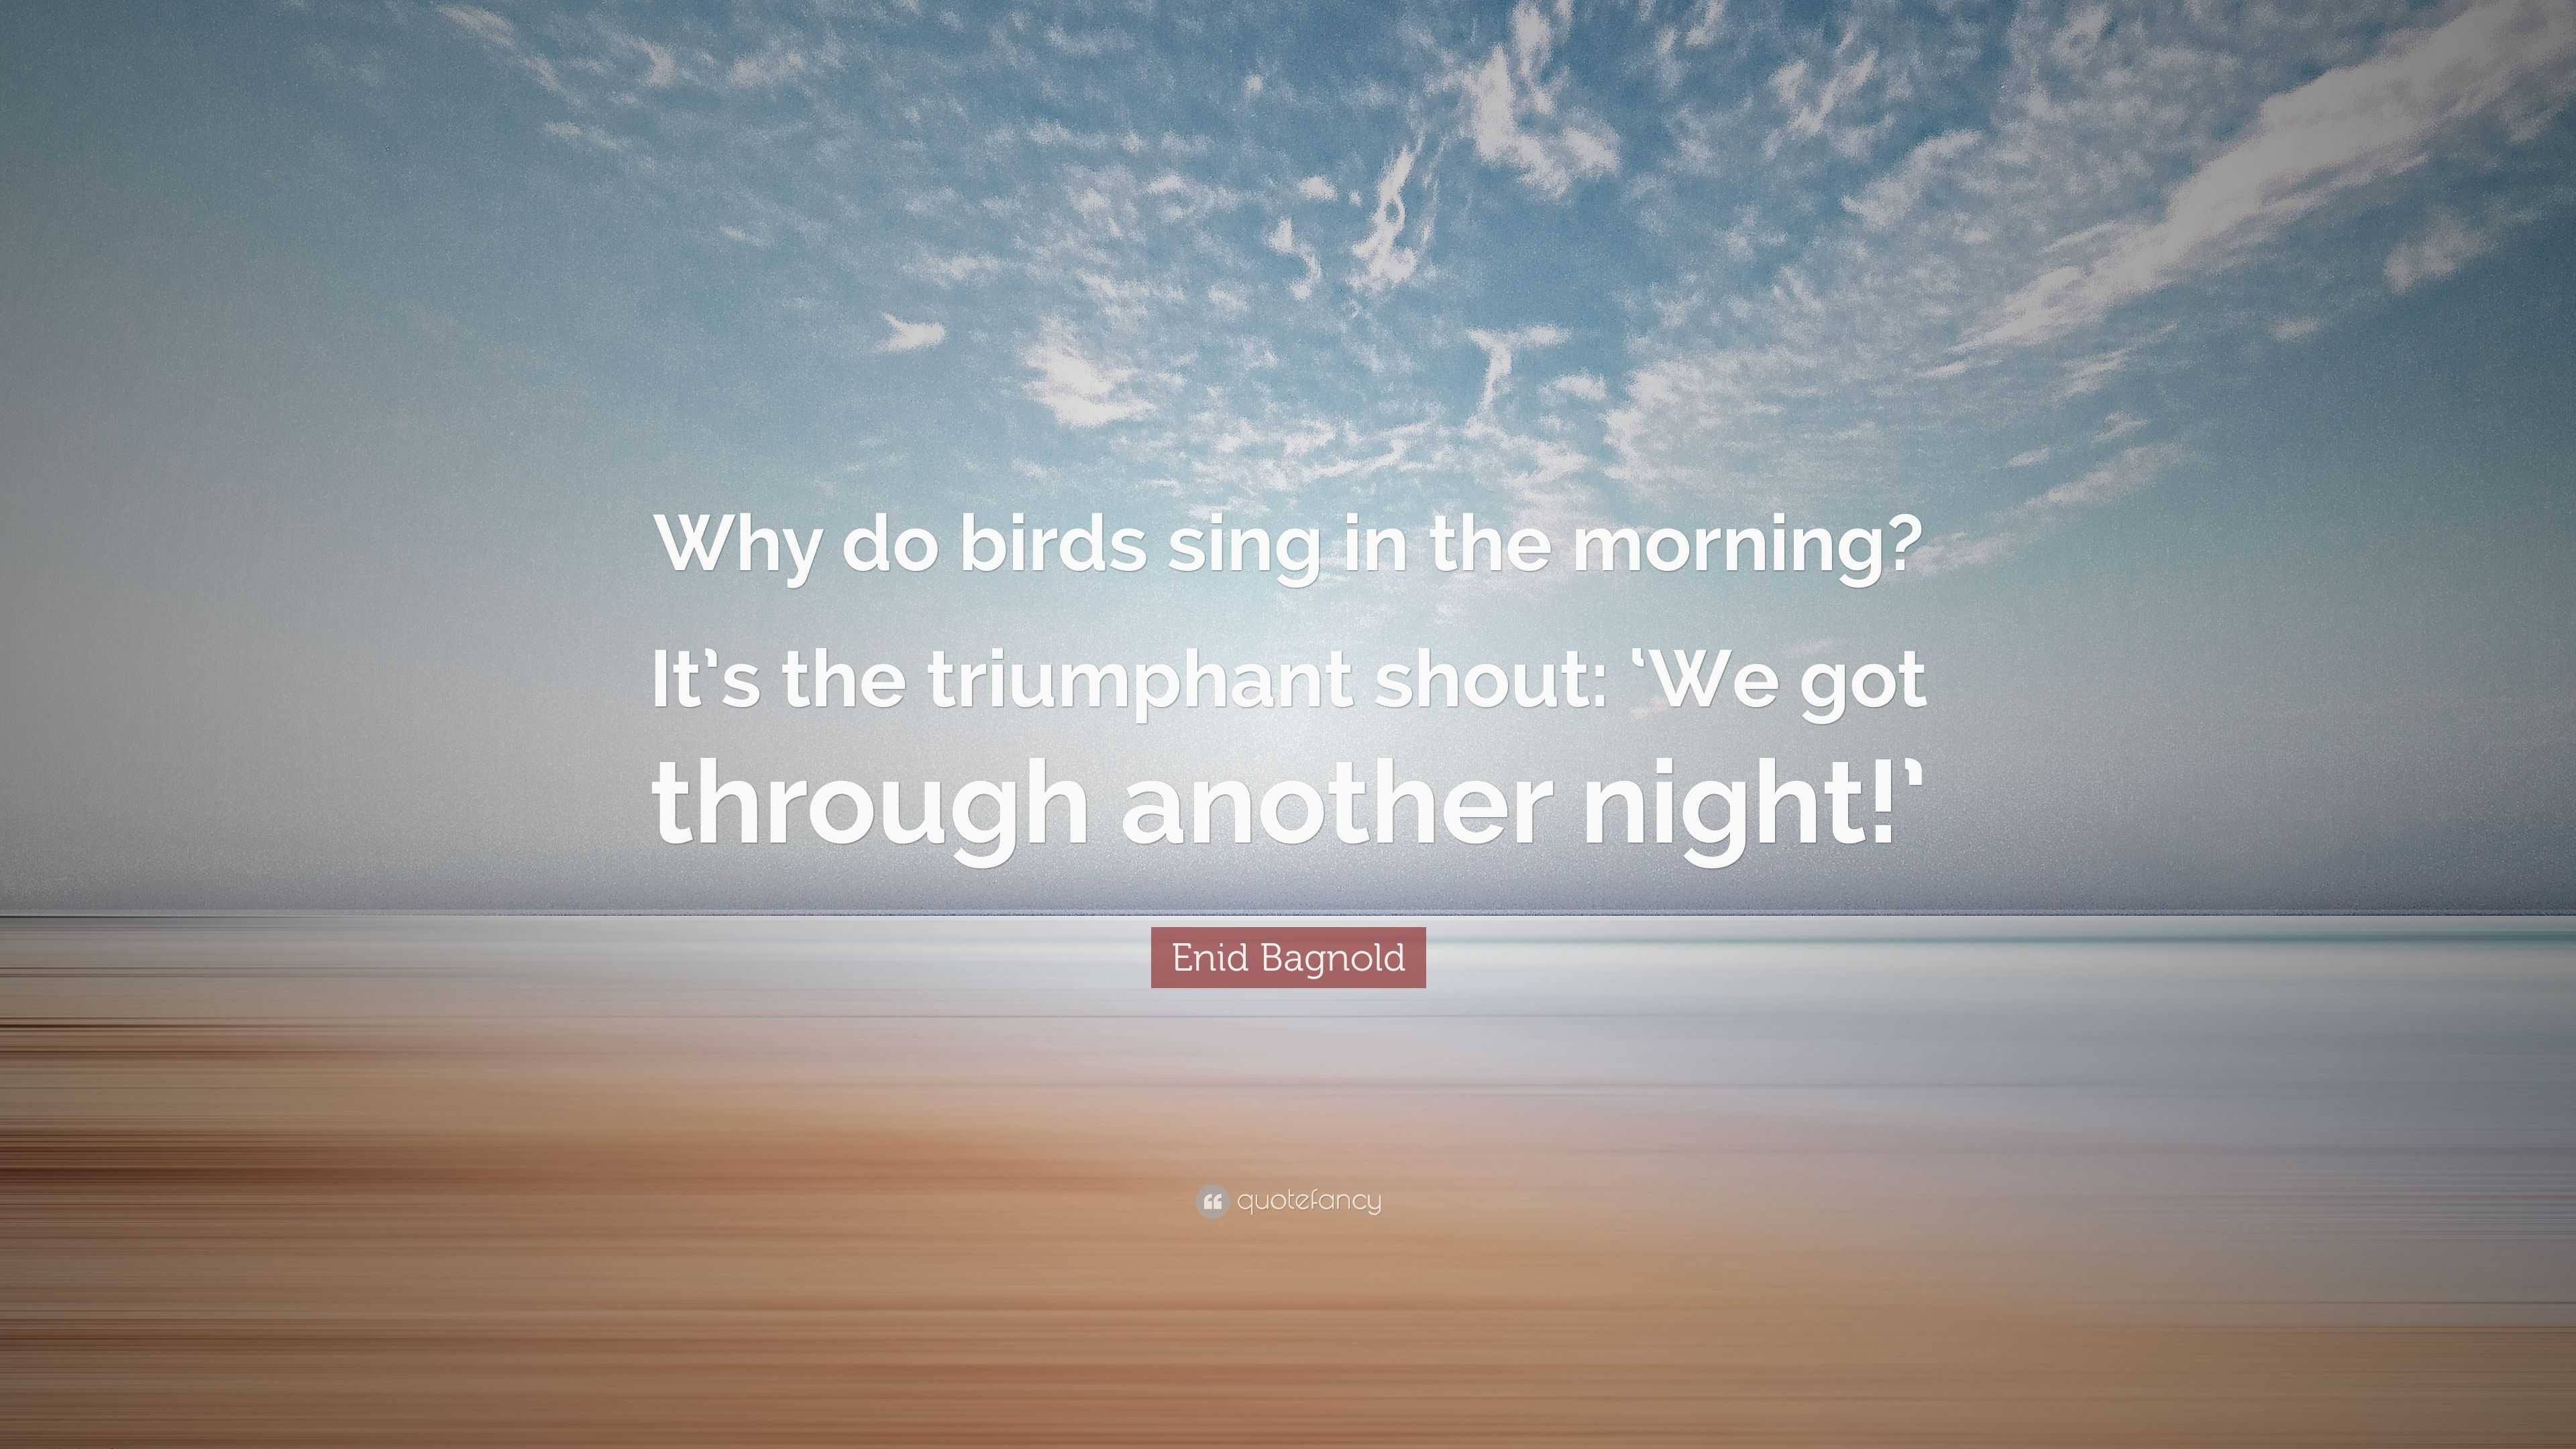 Why birds sing in the morning